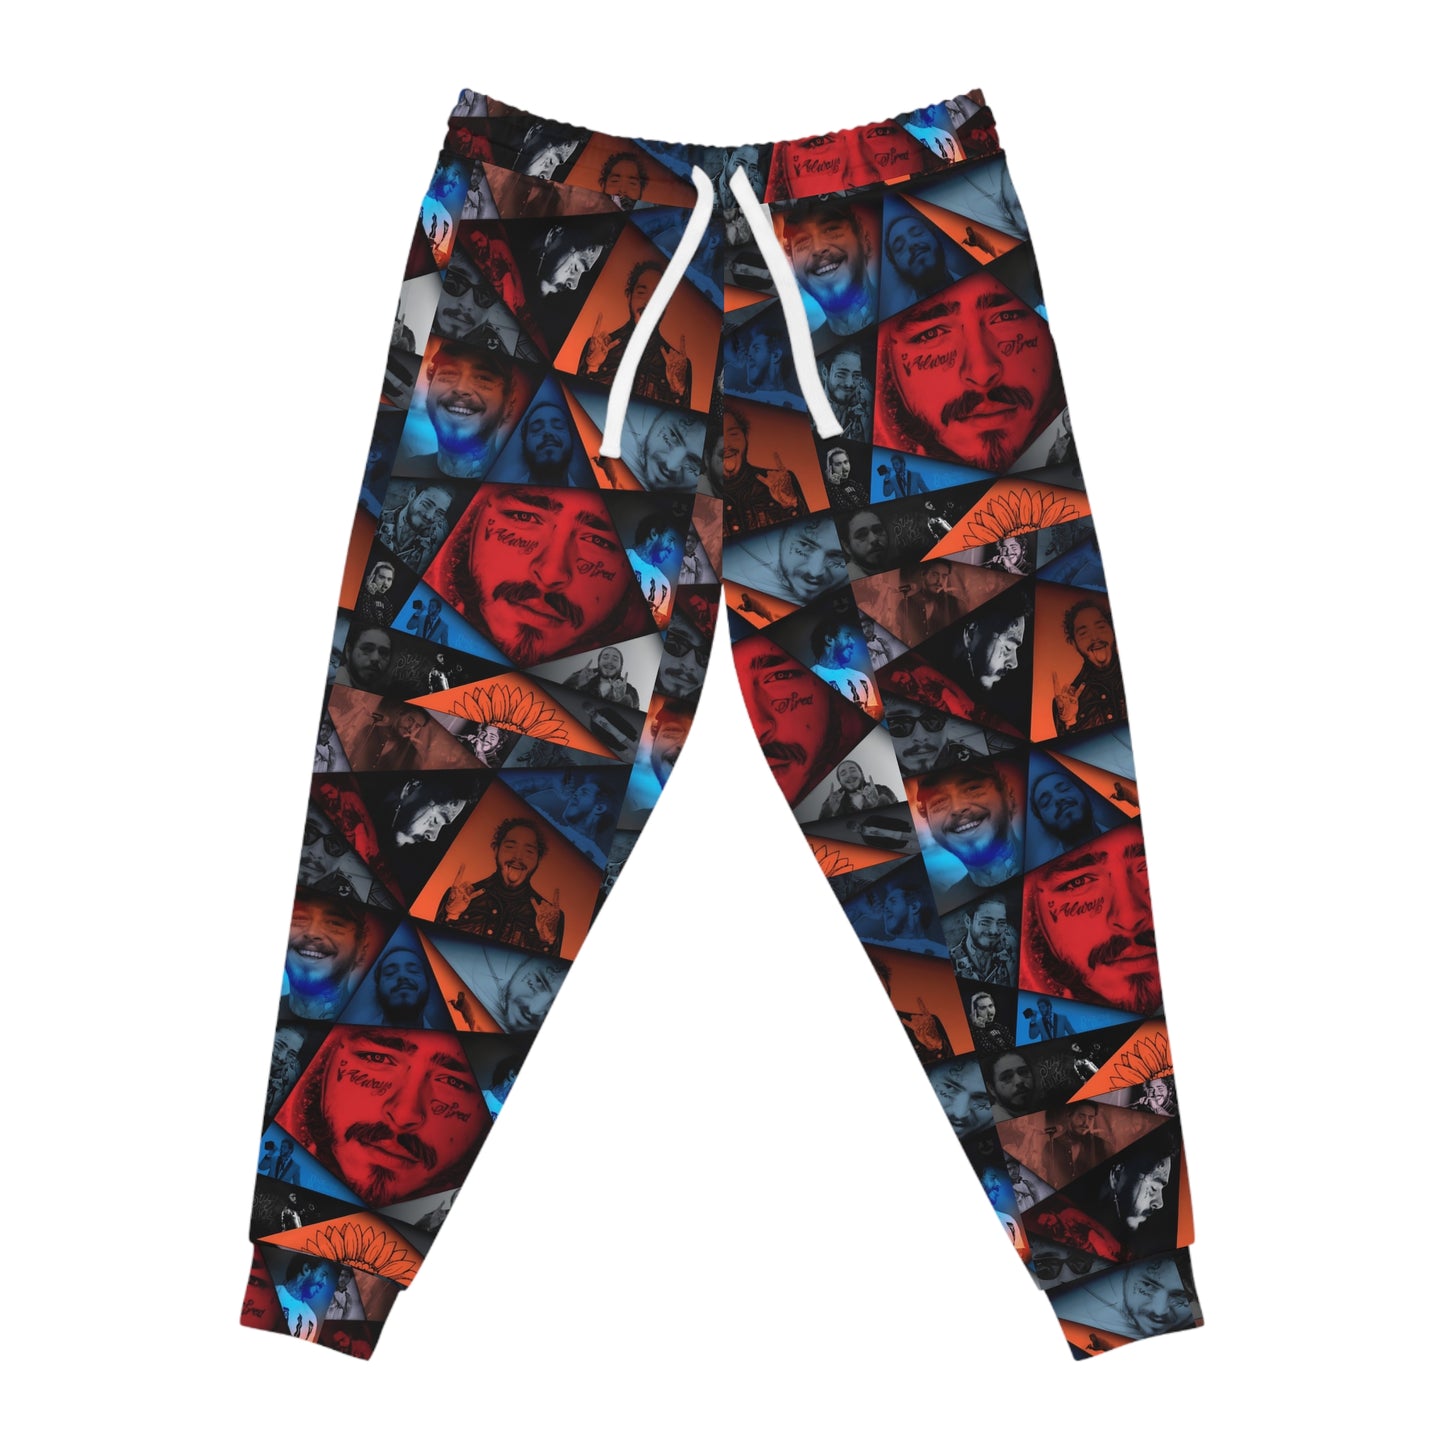 Post Malone Crystal Portraits Collage Athletic Jogger Sweatpants